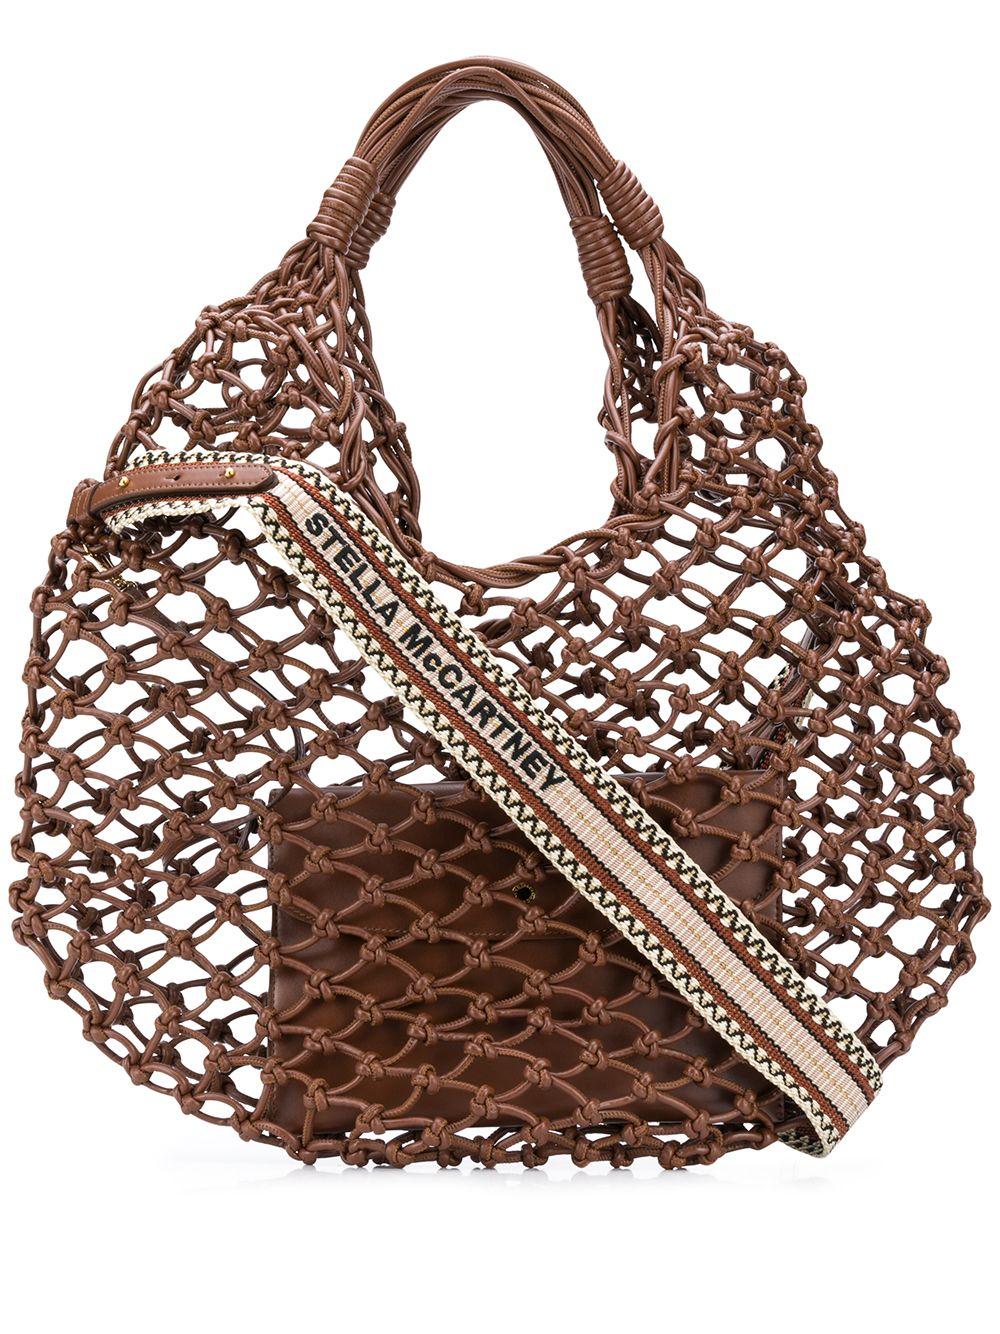 Stella McCartney Knotted Net Tote Bag in Brown | Lyst